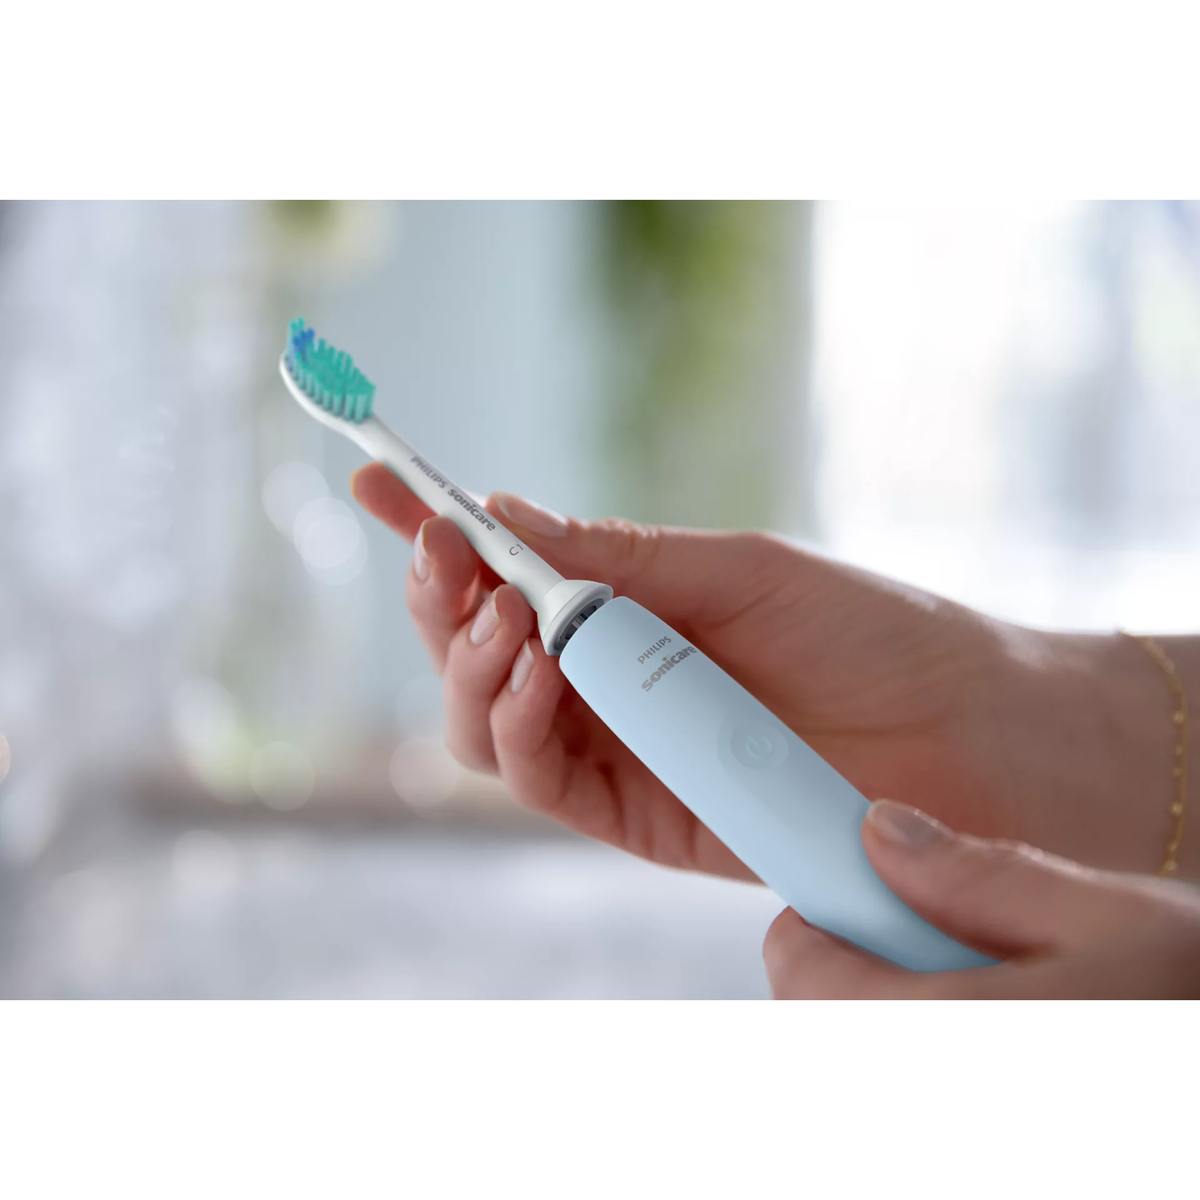 Philips Sonicare 2100 Series Sonic Electric Toothbrush, Light blue, HX3651/12